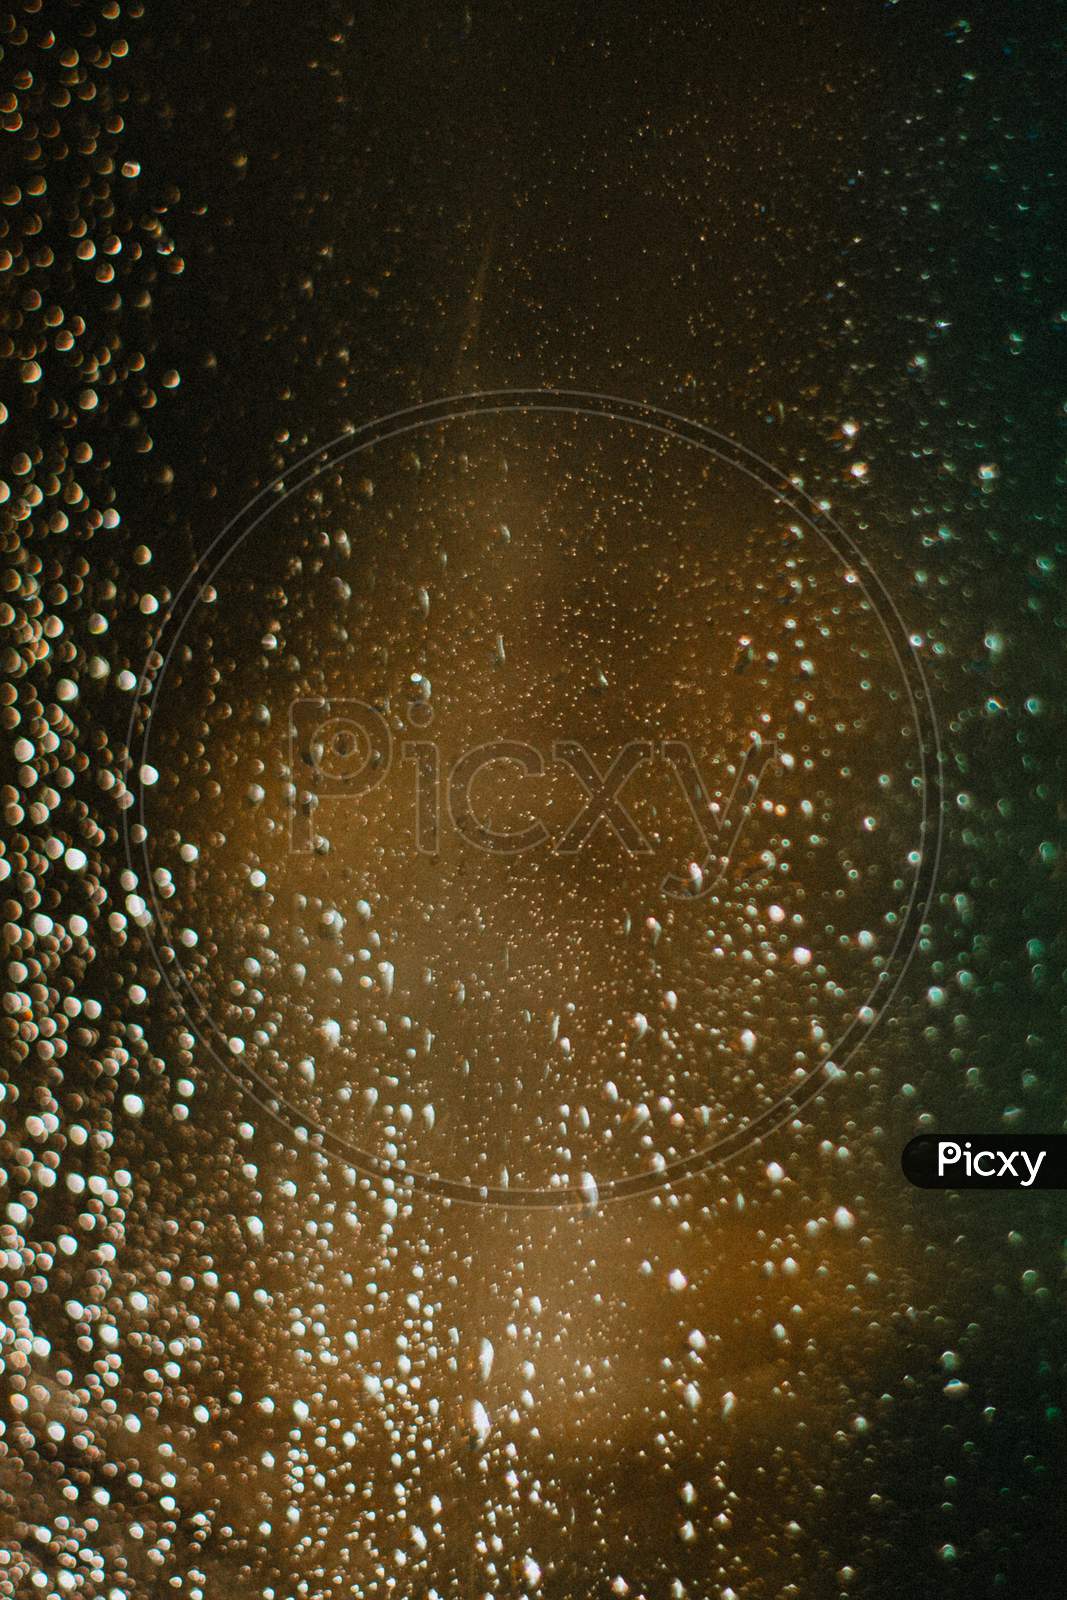 Background Of A Colorful Crystal With Water Drops In It, On Red And Green Tones